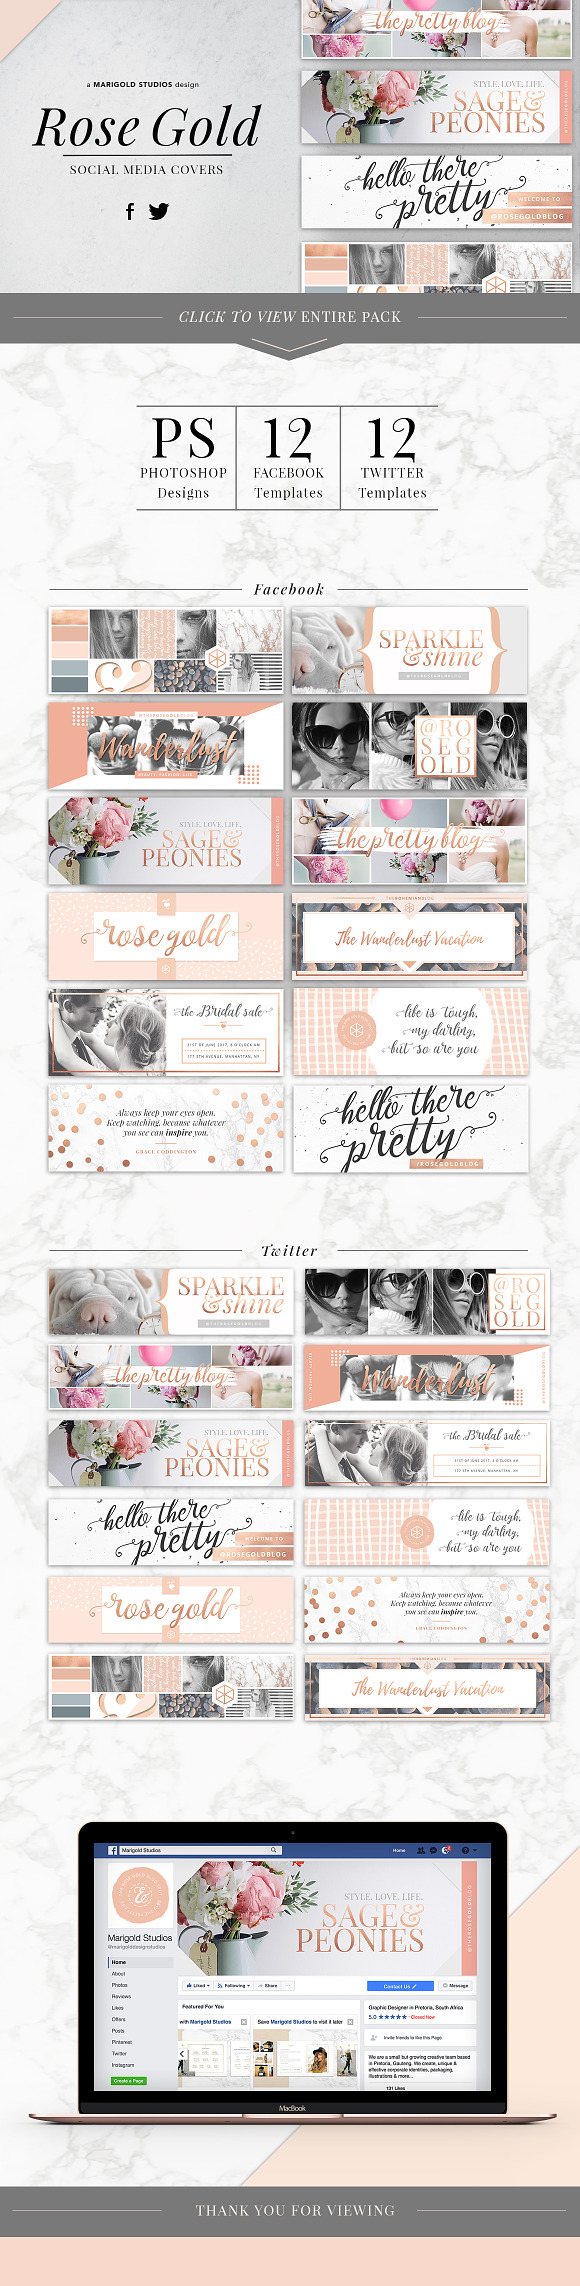 ROSE GOLD | Social Media Covers in Facebook Templates - product preview 6